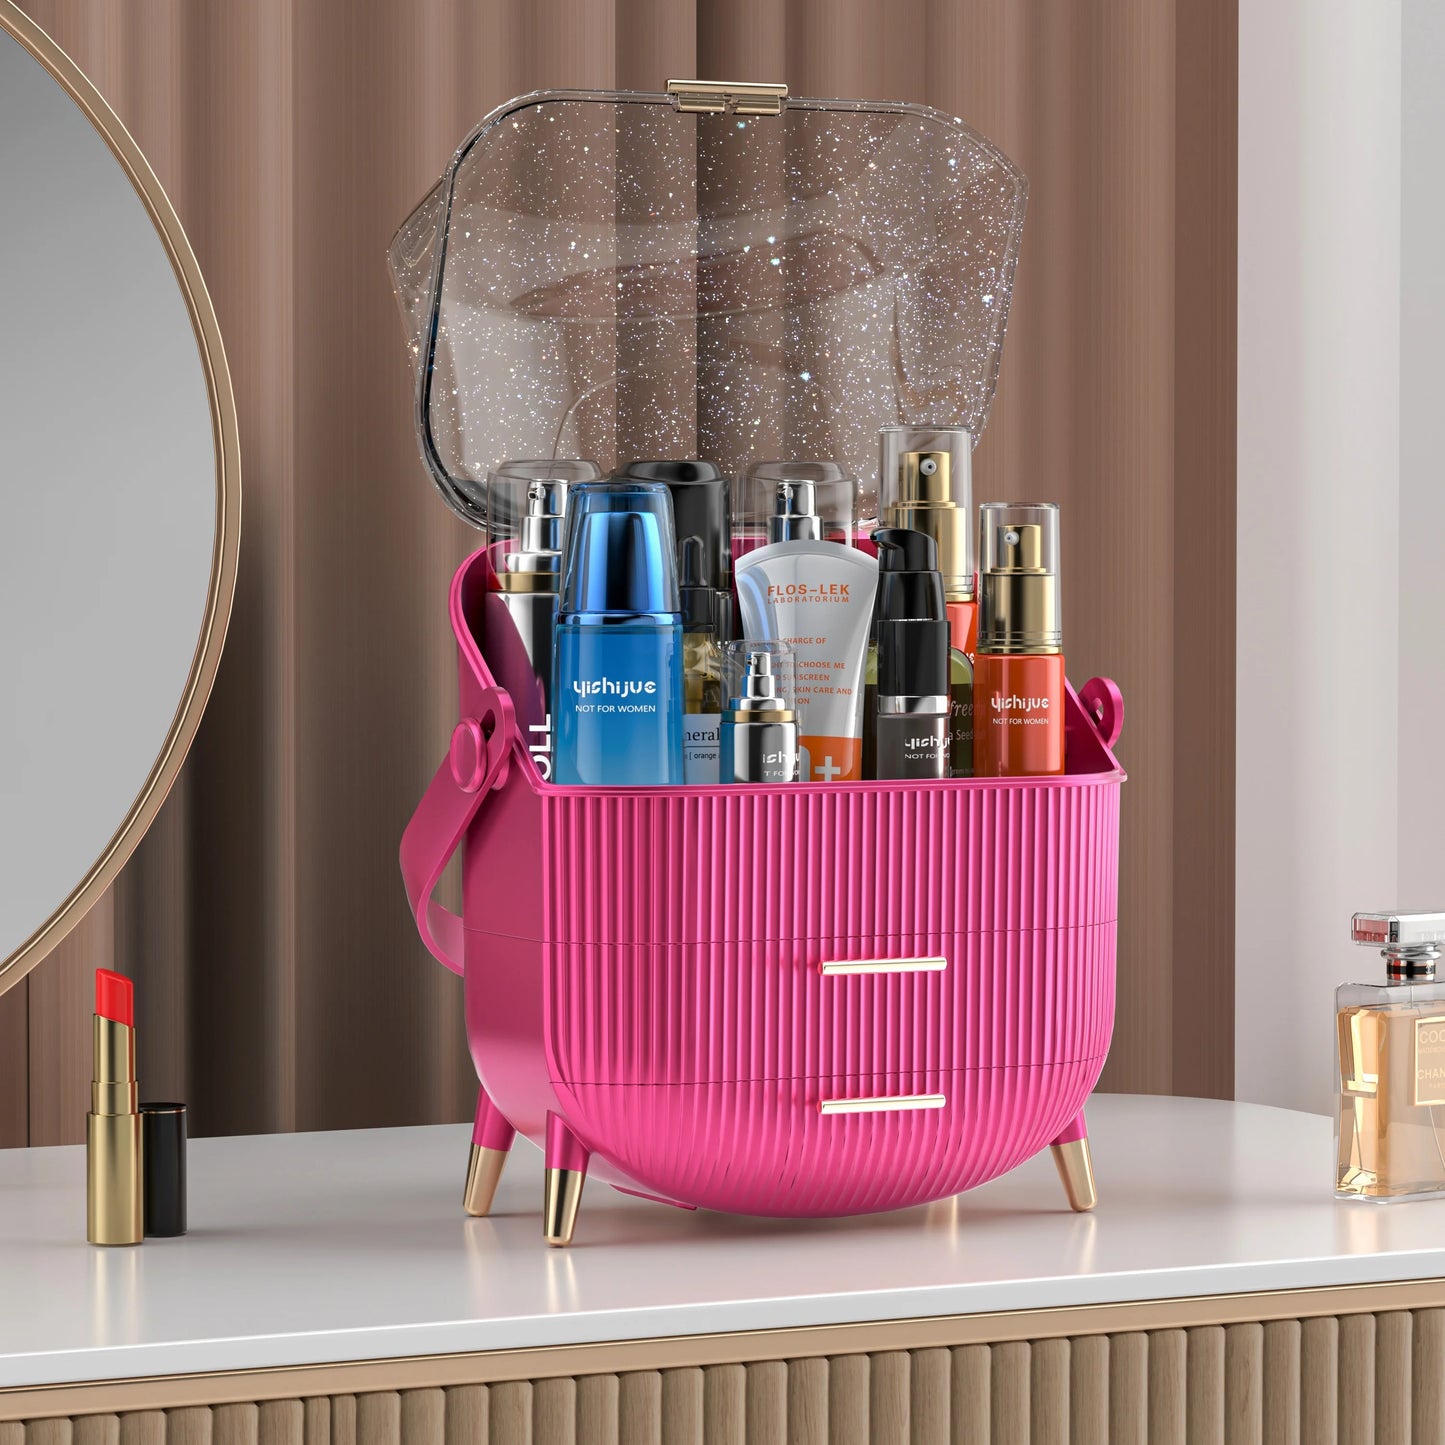 Portable cosmetics storage box, can hold eyebrow pencil eyeshadow skin care products